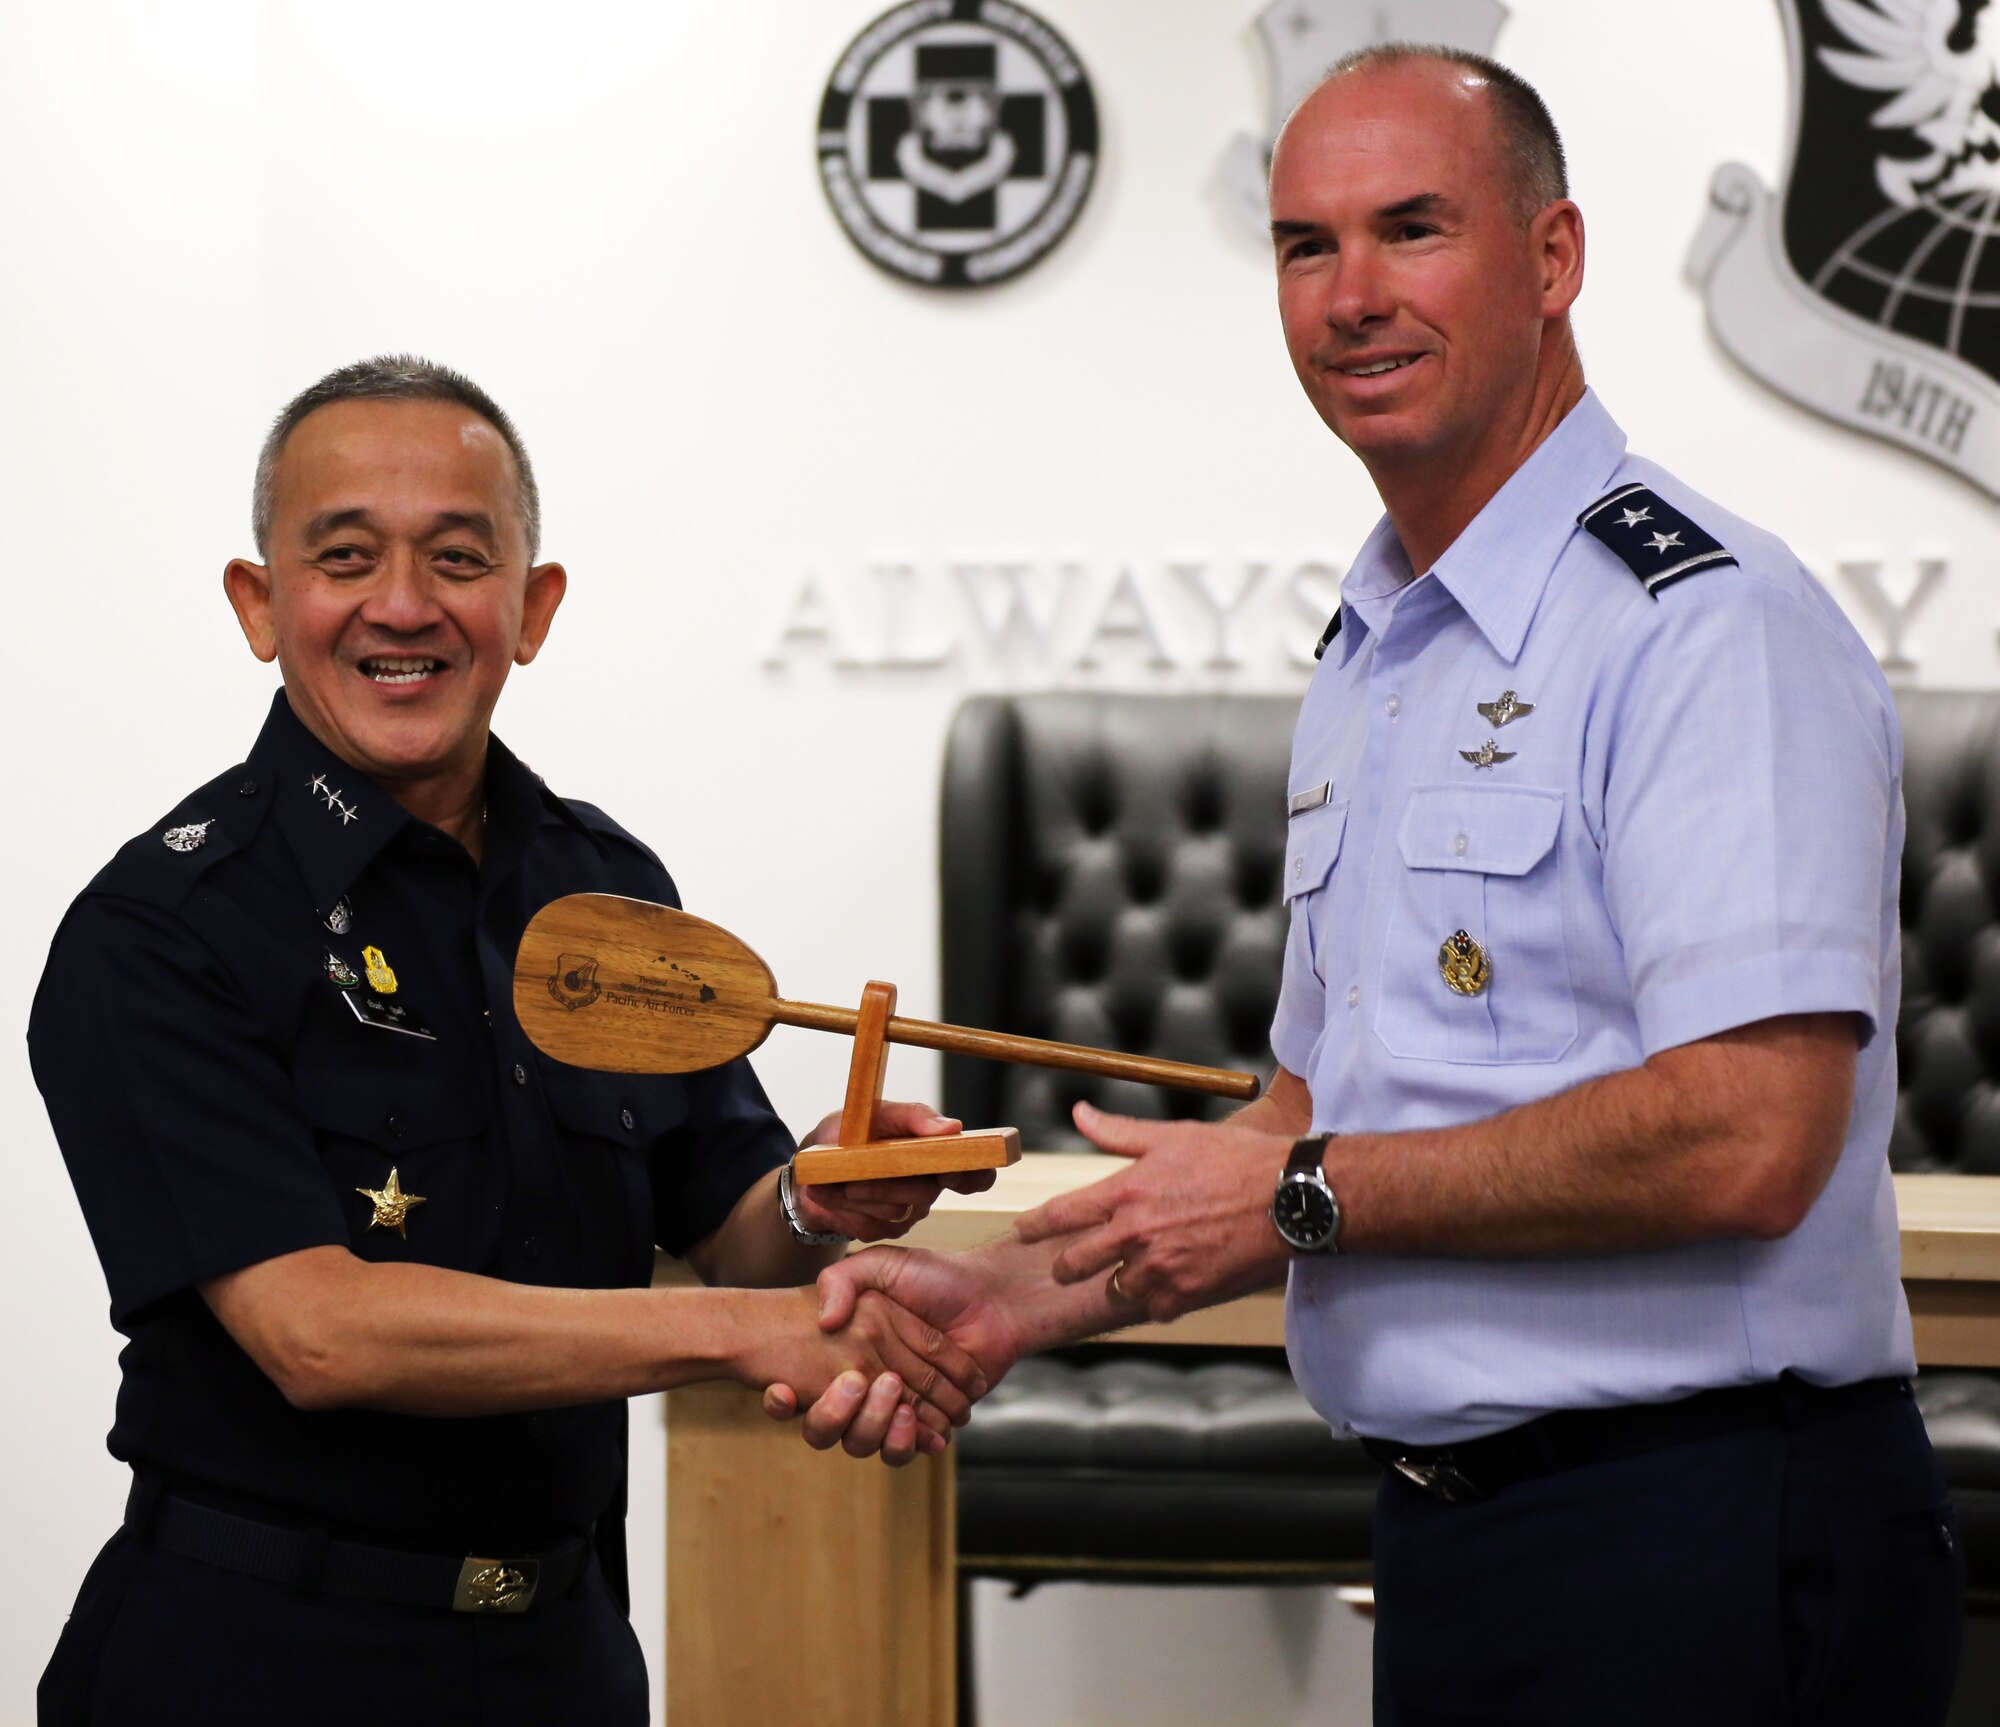 U.S. Air Force Maj. Gen. Brian Killough, Pacific Air Forces deputy commander, presents Air Marshal Tarin Punsri, Royal Thai air force, a gift from Hawaii during the closing ceremonies of the sixth Airman-to-Airman talks at Camp Murray, Wash., Aug. 28, 2019. A2A talks are jointly held conferences between PACAF and regional partner air forces designed to bring together both air forces to discuss and improve on training, tactics and procedures. This year marked the first talks to include participation by the Washington National Guard, with Washington state as the state partner to Thailand since 2002. (U.S. National Guard photo by Joseph Siemandel)